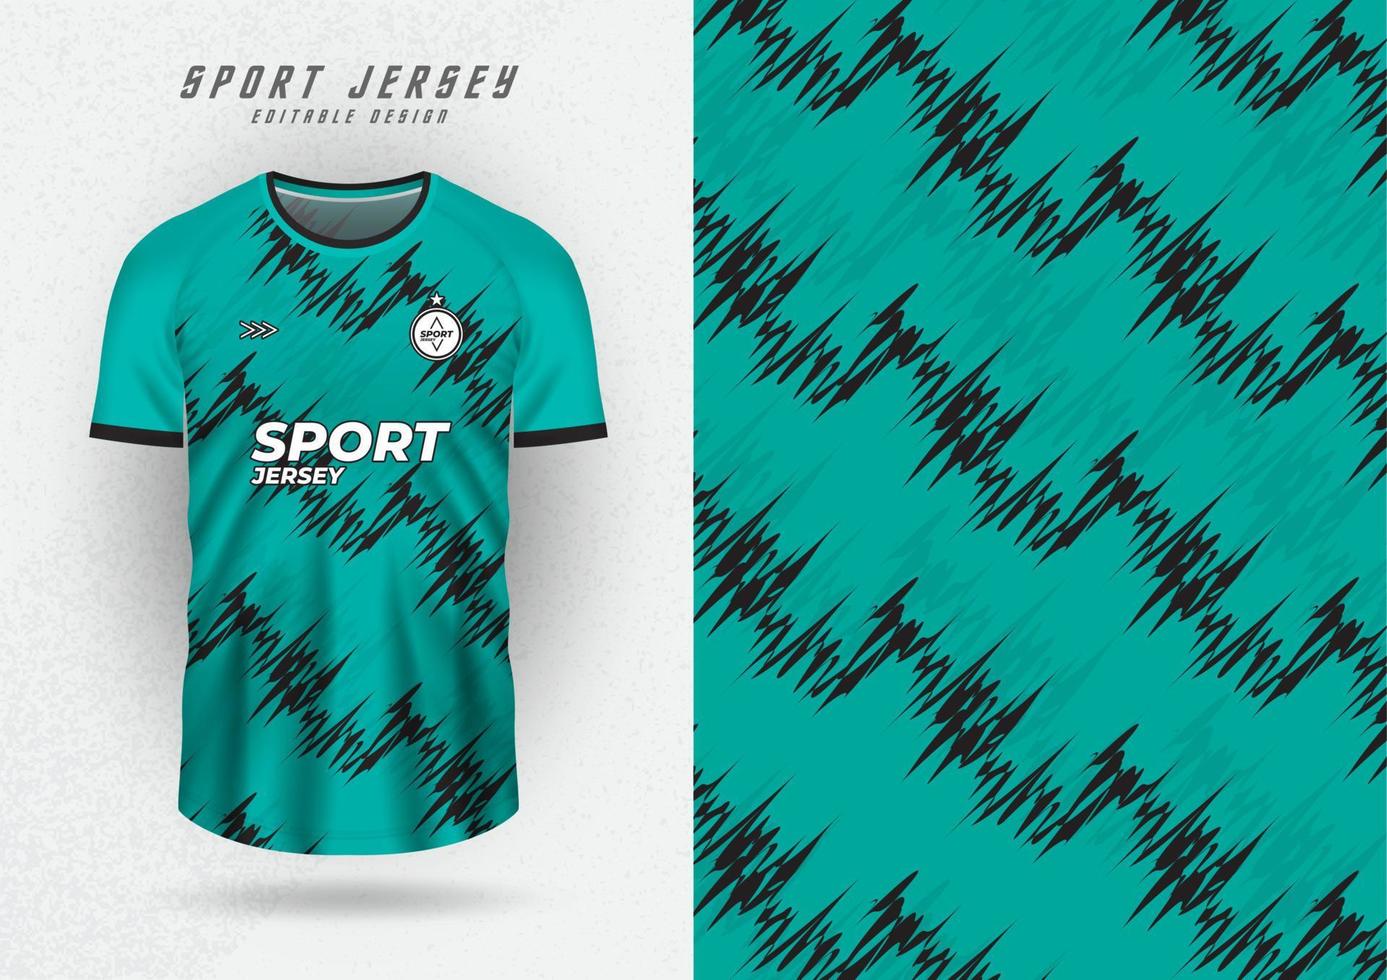 t-shirt design background for team jersey racing cycling soccer game green oblique wave pattern vector